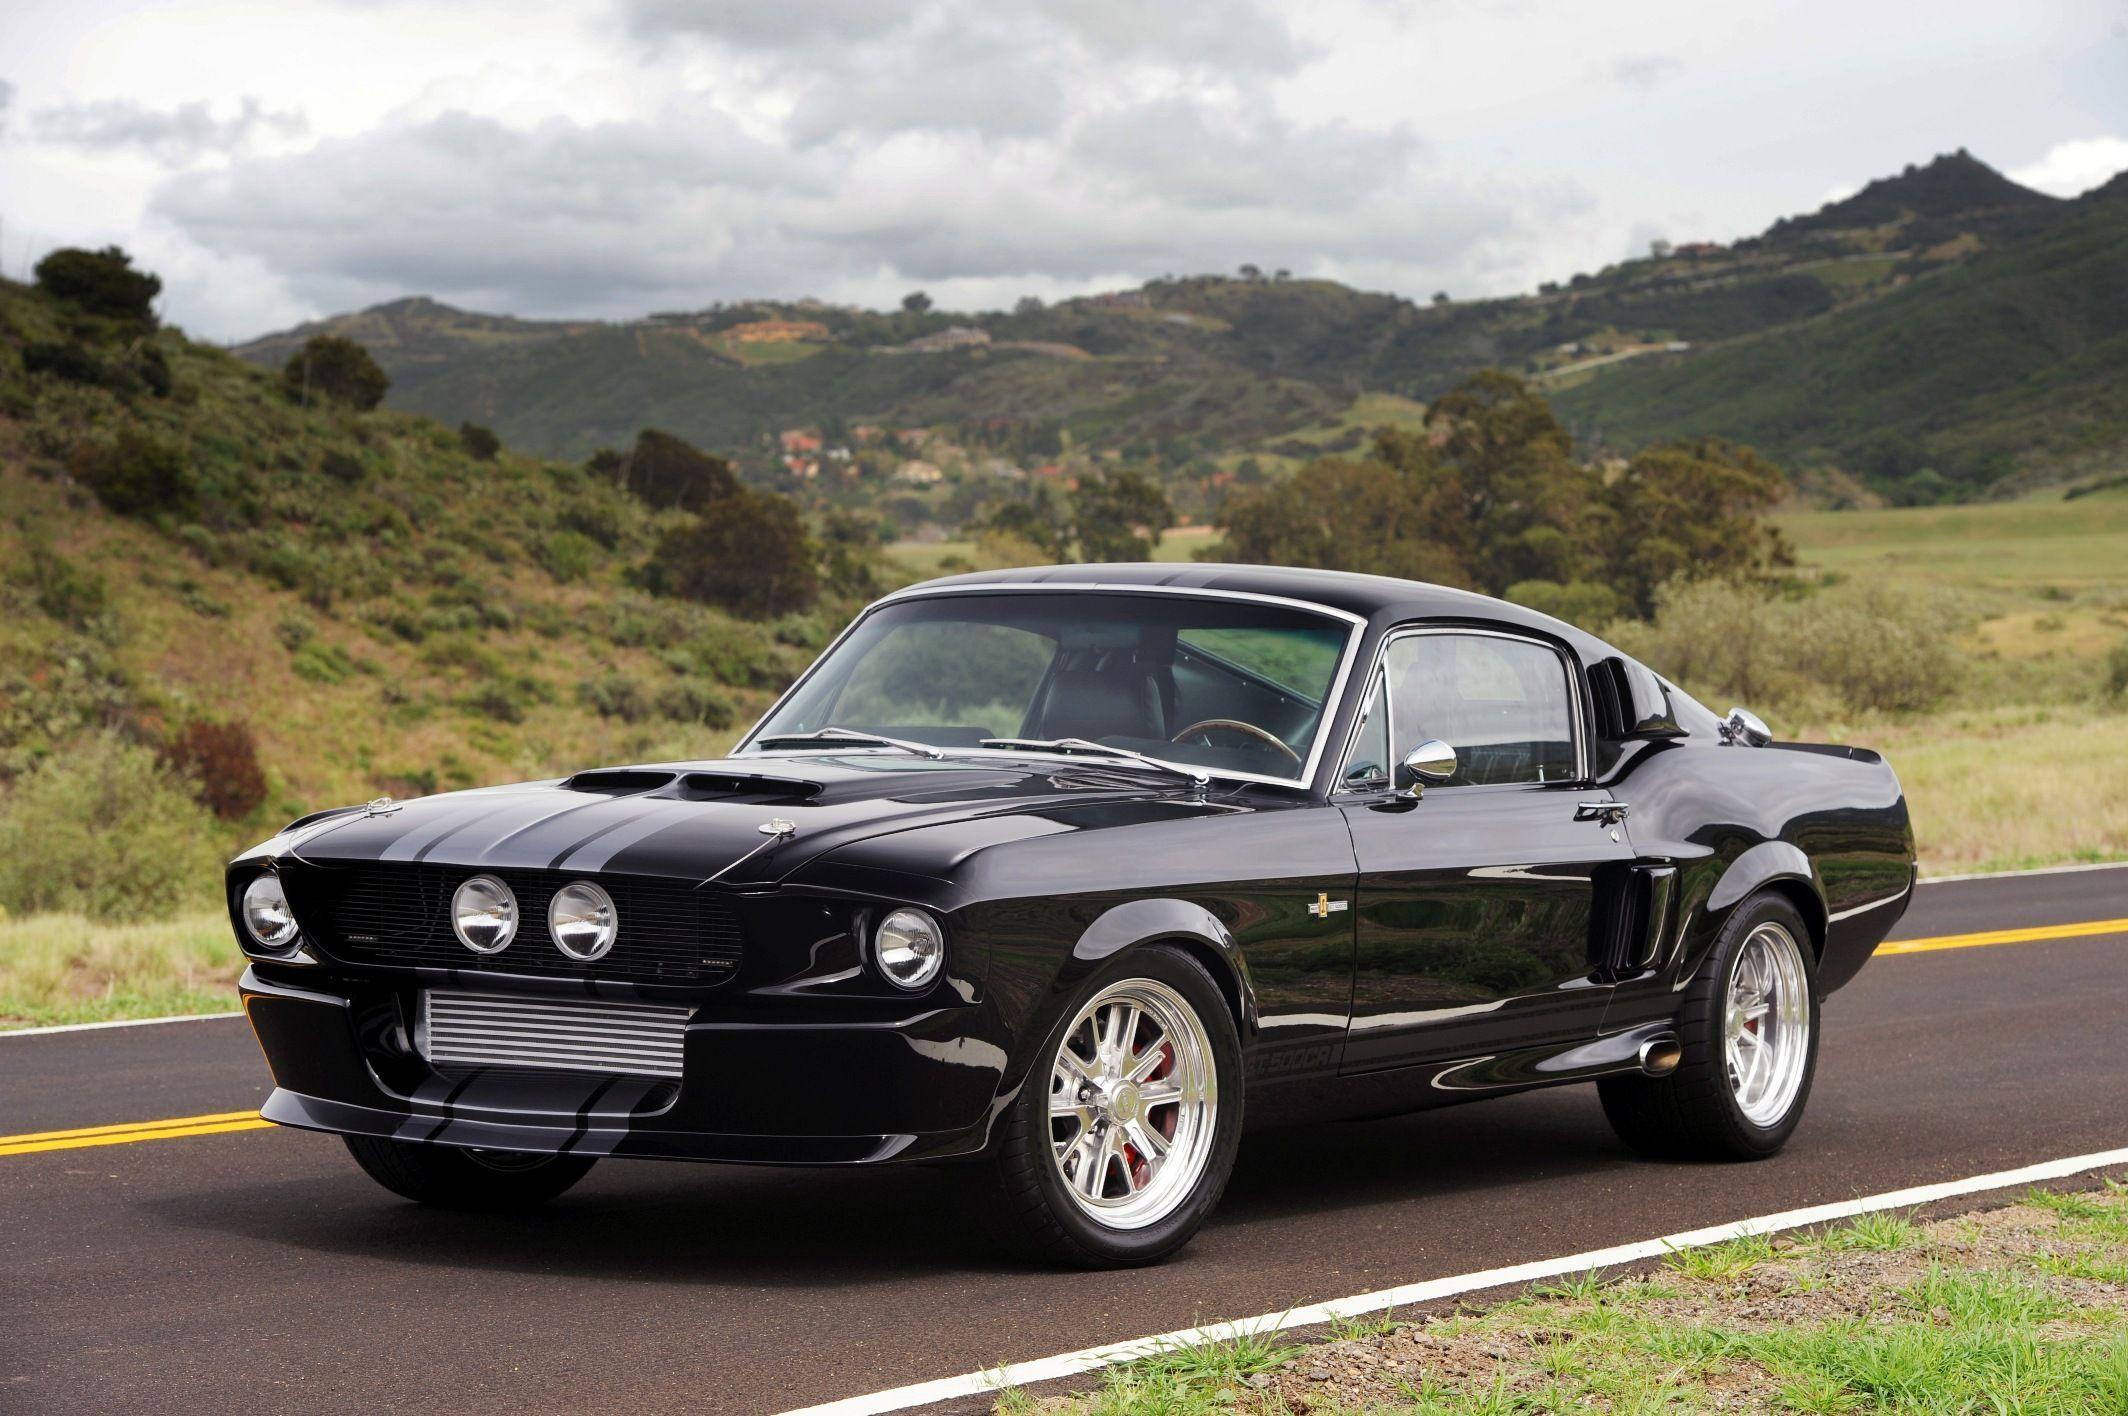 18+ Real 1967 Shelby Gt500 Mustang Wallpaper free download